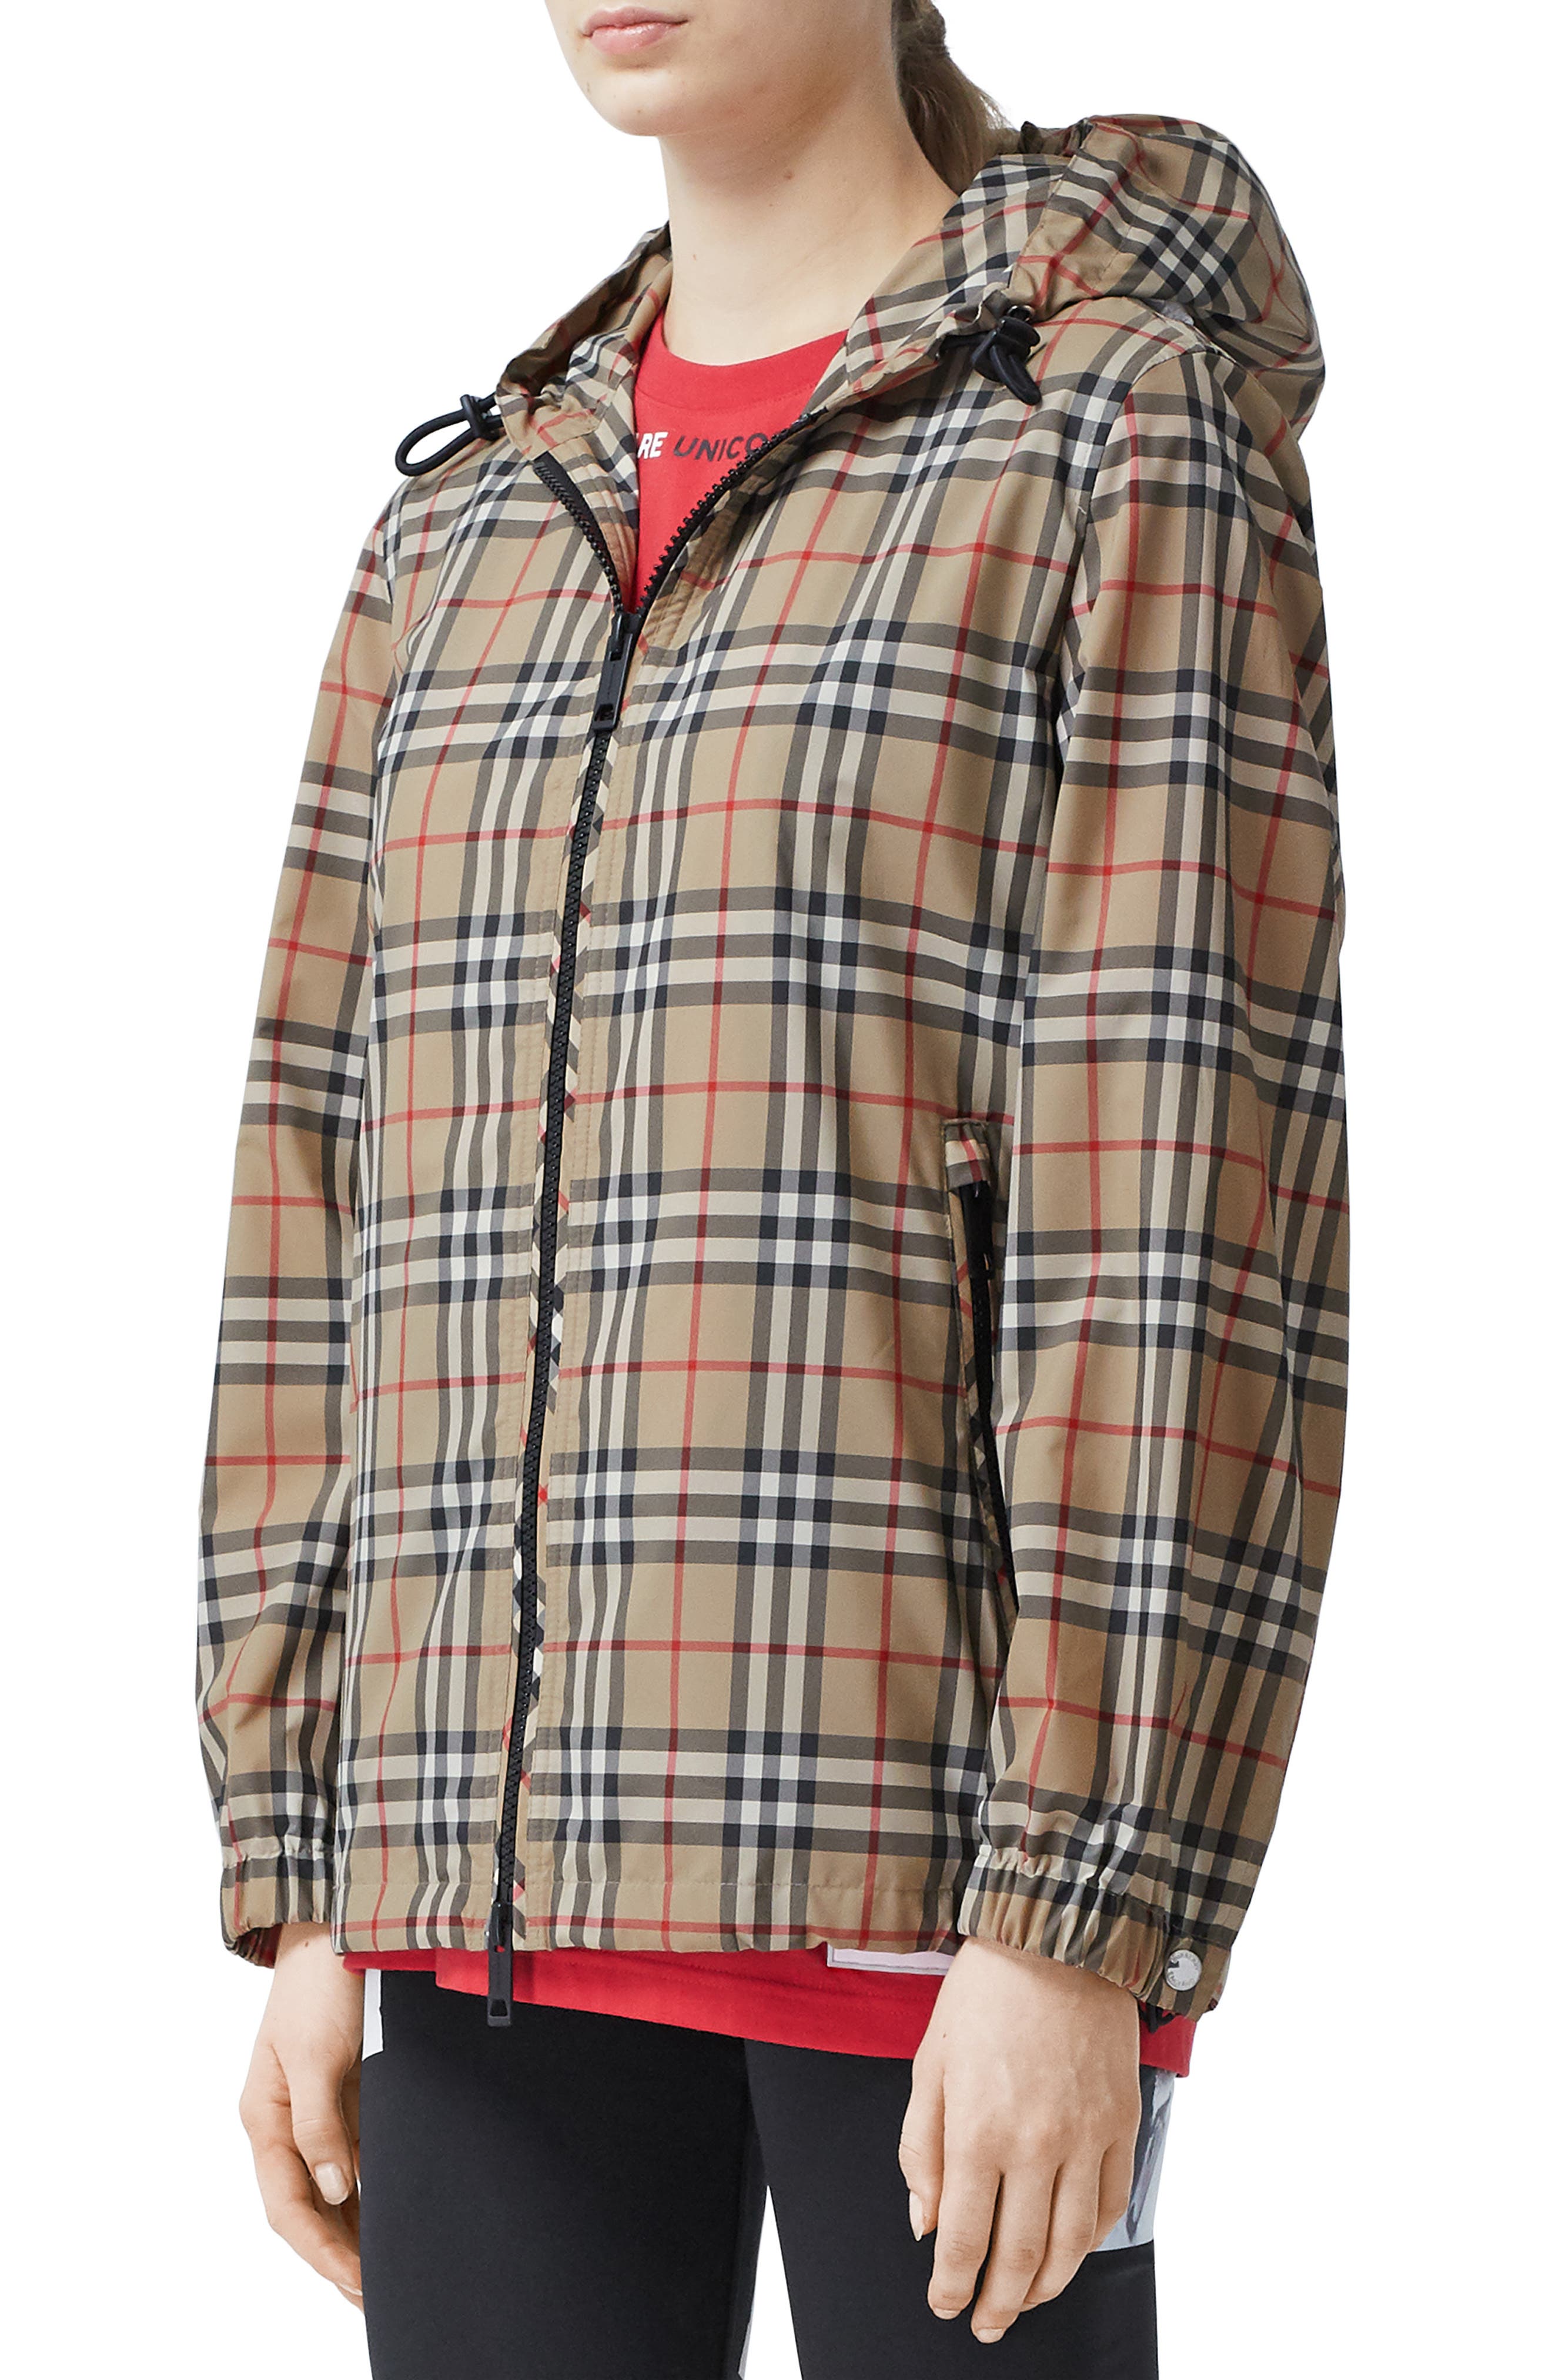 Burberry Everton Check Hooded Rain Jacket in Archive Beige Ip Chk at Nordstrom